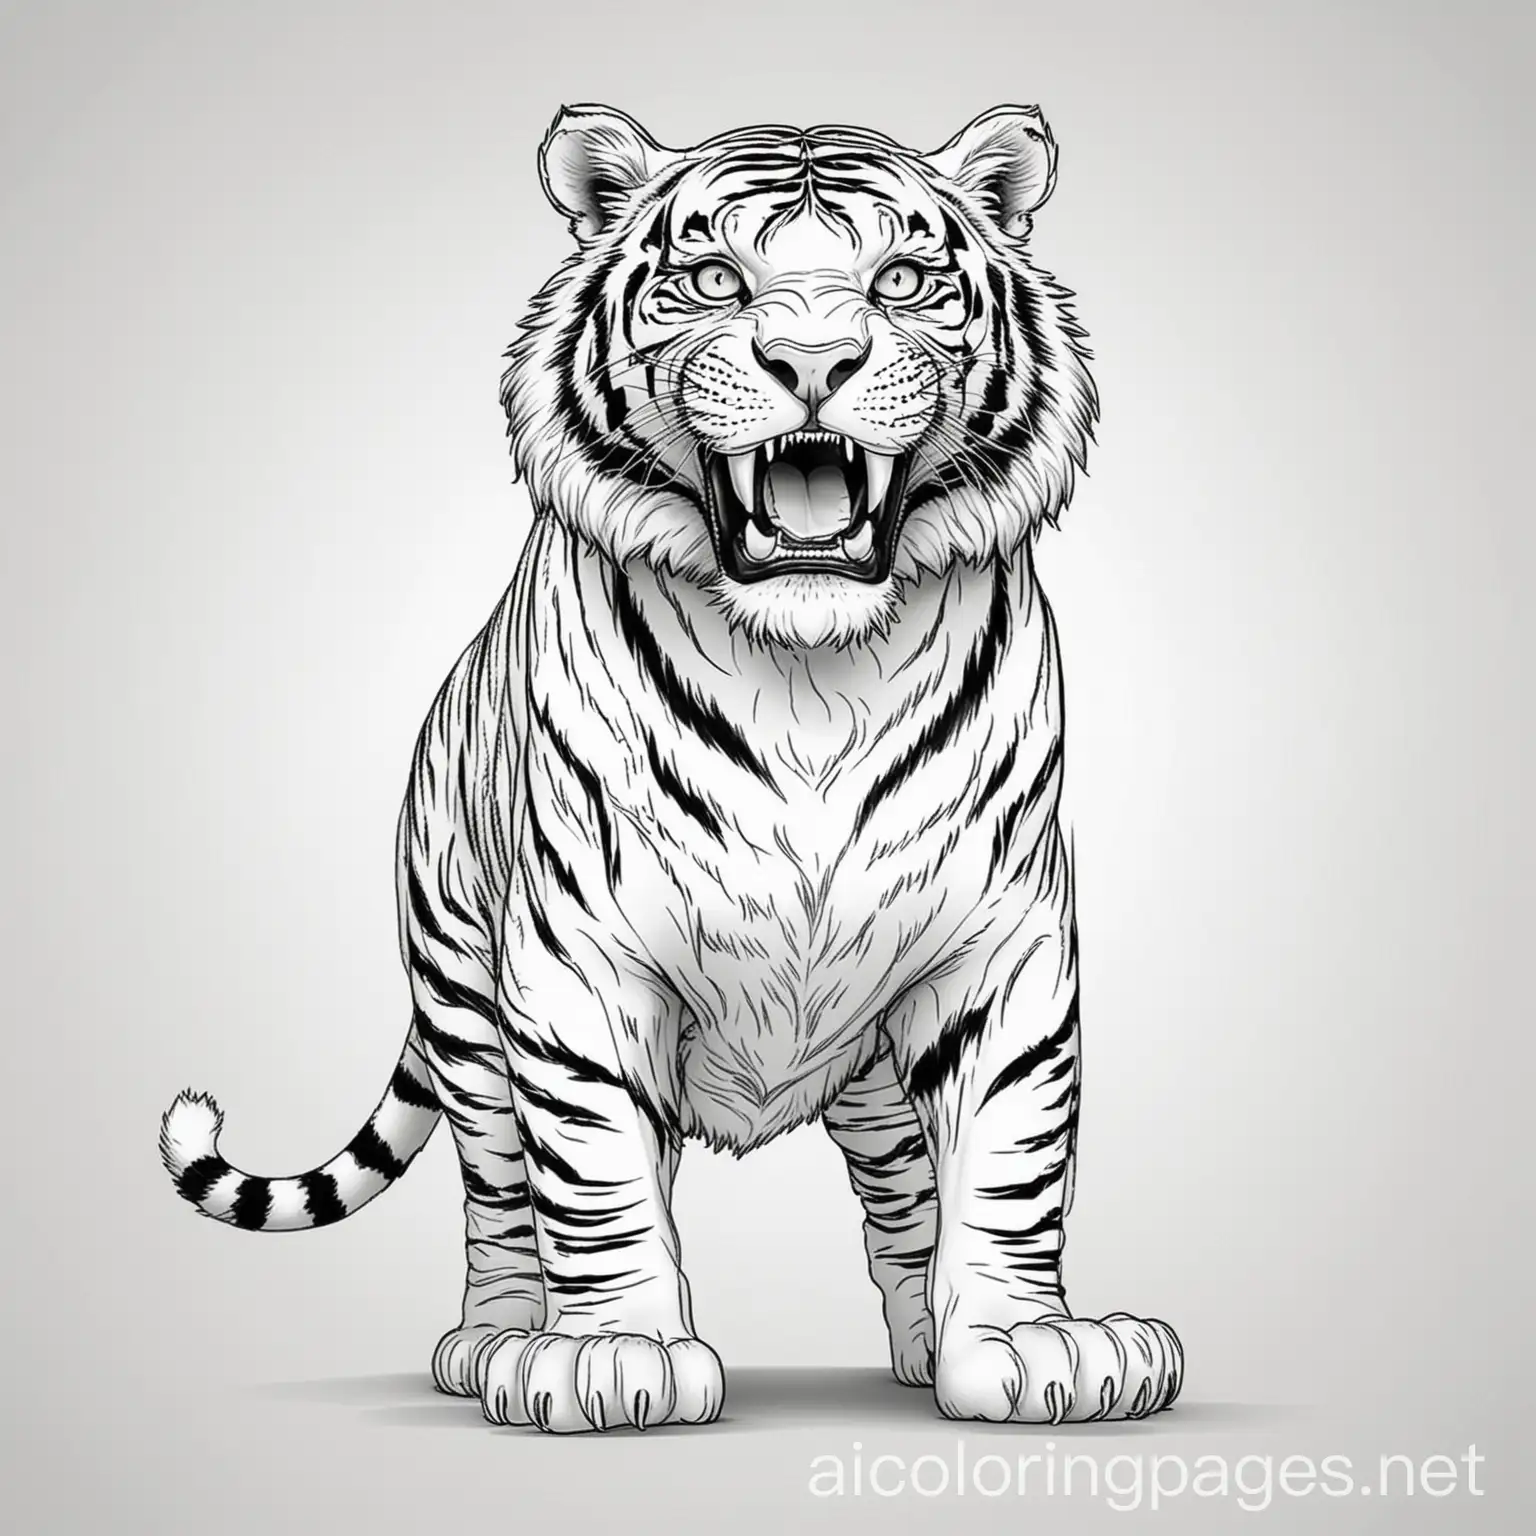 full body of a big big scary tiger who is ready to attack an animal with open mouth. in cartoon sytle Coloring Page, black and white, line art, white background, Simplicity, Ample White Space. The background of the coloring page is plain white to make it easy for young children to color within the lines. The outlines of all the subjects are easy to distinguish, making it simple for kids to color without too much difficulty, Coloring Page, black and white, line art, white background, Simplicity, Ample White Space. The background of the coloring page is plain white to make it easy for young children to color within the lines. The outlines of all the subjects are easy to distinguish, making it simple for kids to color without too much difficulty, Coloring Page, black and white, line art, white background, Simplicity, Ample White Space. The background of the coloring page is plain white to make it easy for young children to color within the lines. The outlines of all the subjects are easy to distinguish, making it simple for kids to color without too much difficulty